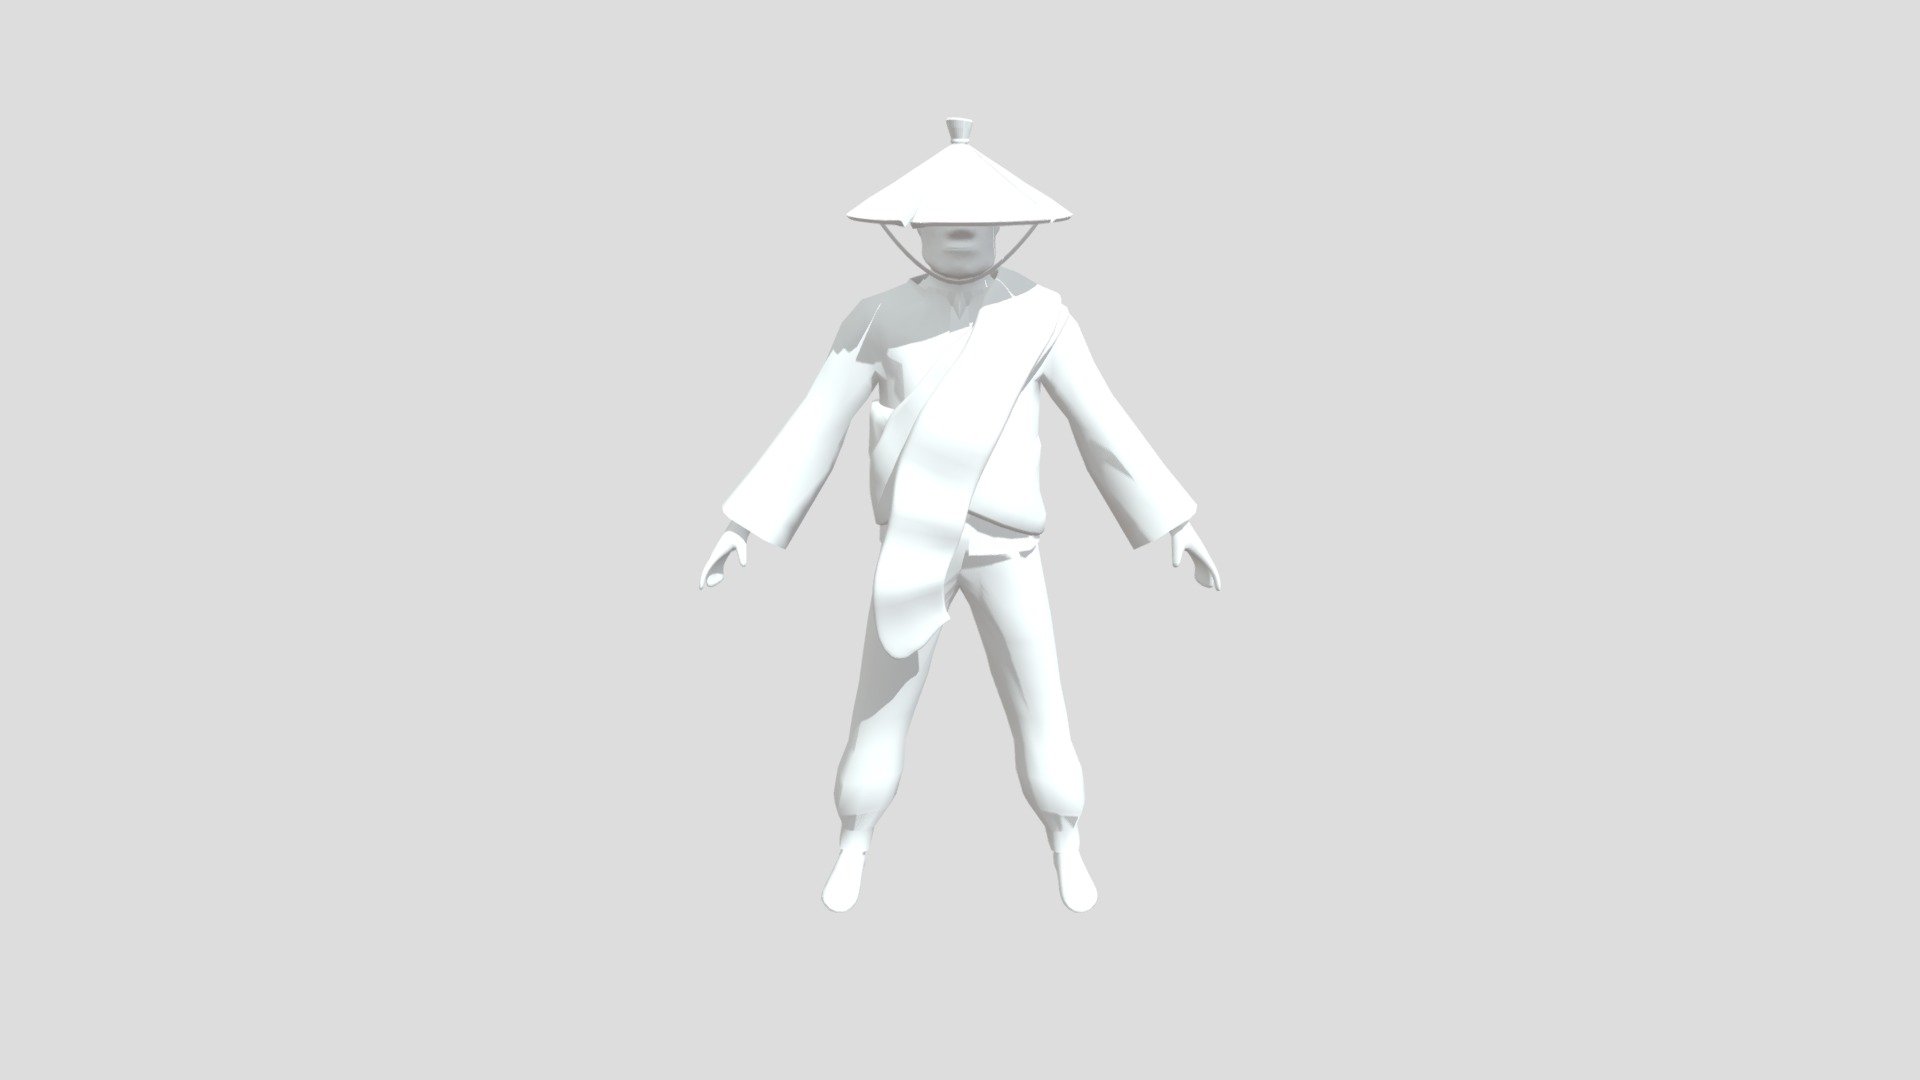 Did some cloth simulation and general animation on this model, hope you'll have fun with it too ! 😄
No UV.

Related project: www.instagram.com/p/CNcNJUmBZir/

More at @mushy_wrap
It is yours without quote or restriction, have fun with it !
Don't hesitate to send me feedbacks with your finished projects, I'd love to be blown away by your work ! 🤯

Please download, tweak and amaze people ! ♥
► Drop a ⭐Like⭐ if it helped ! ◄ 3d model